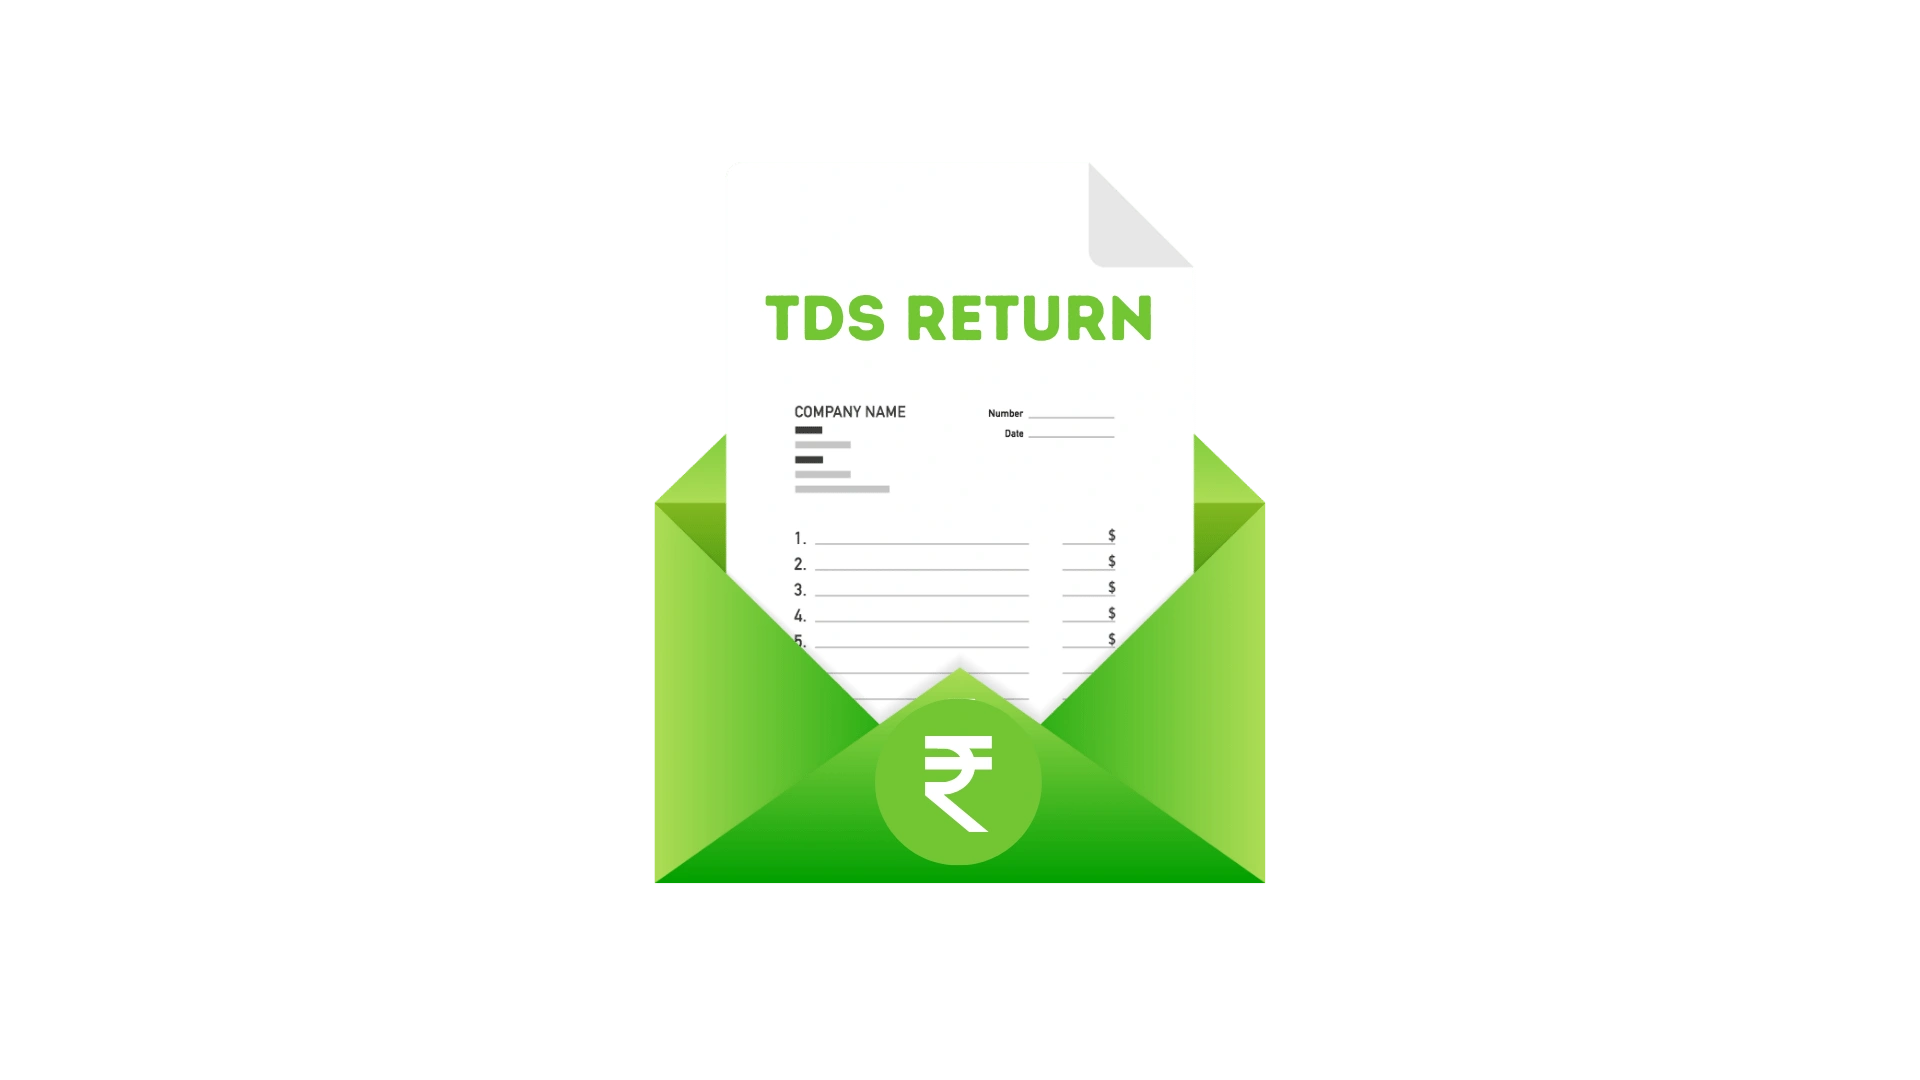 Get your TDS returns filed from MYFINTAX-Online Legal, Tax and Financial Service provider in India 